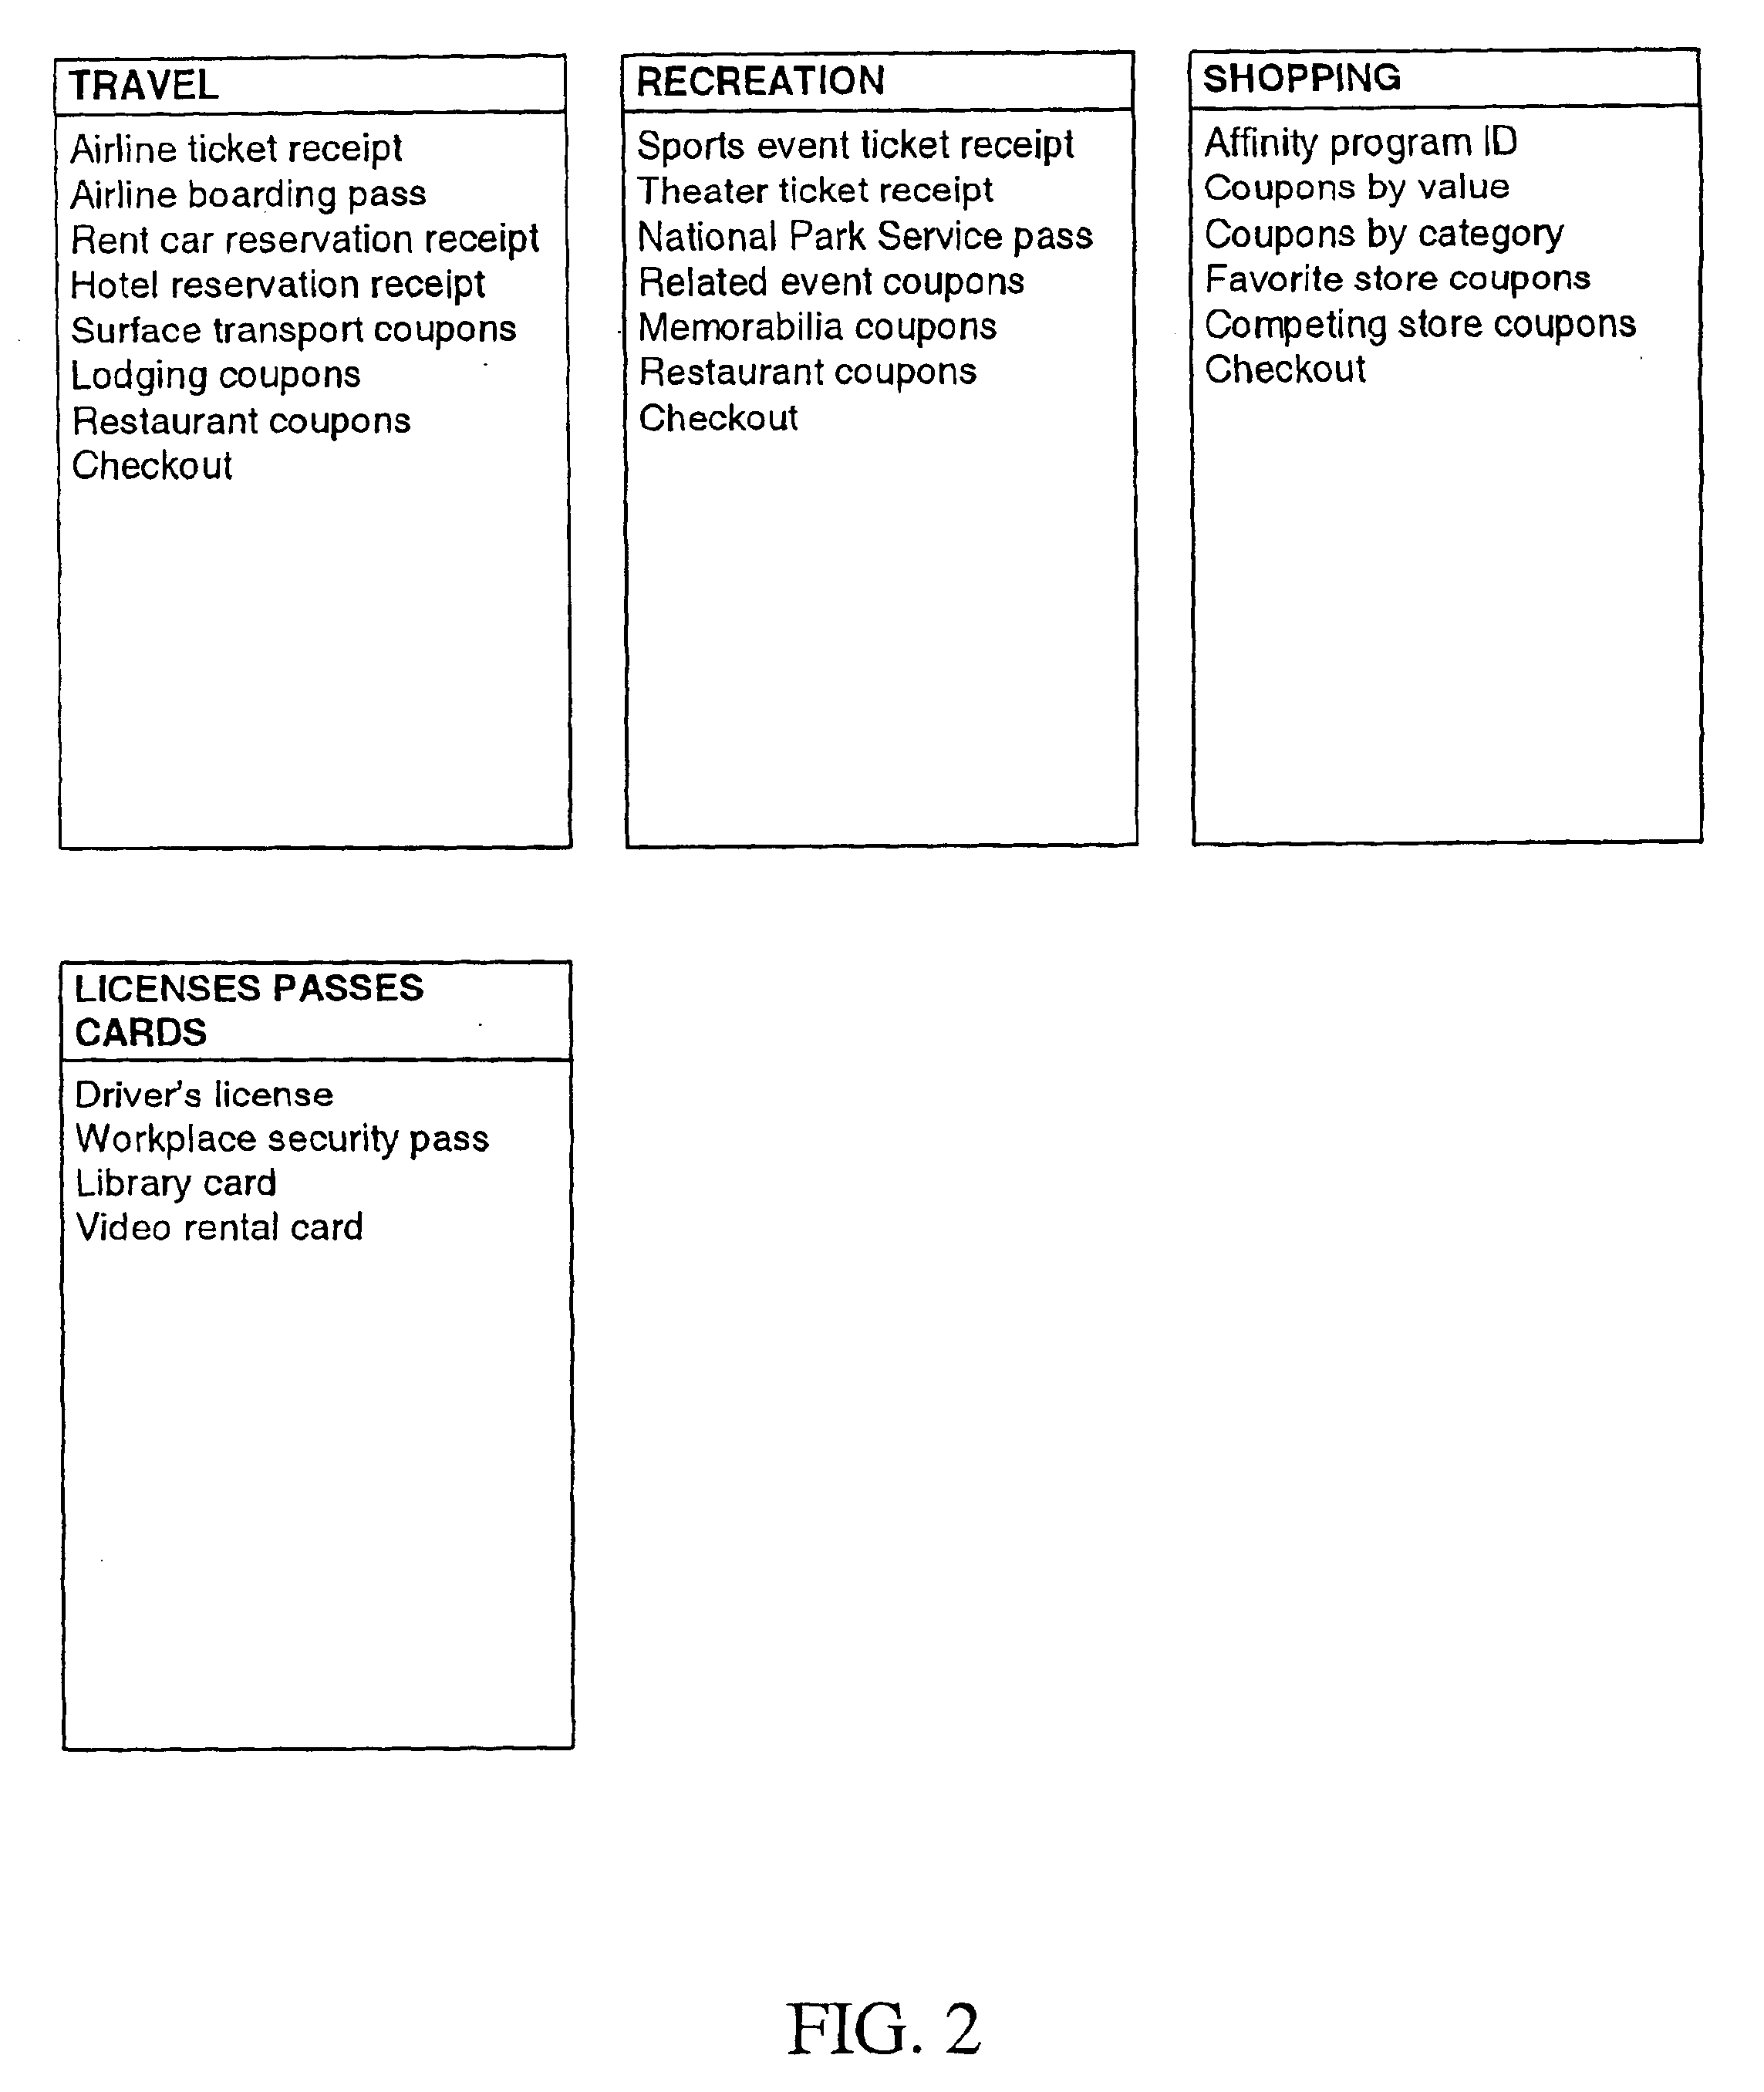 Method and apparatus for acquiring, maintaining, and using information to be communicated in bar code form with a mobile communications device